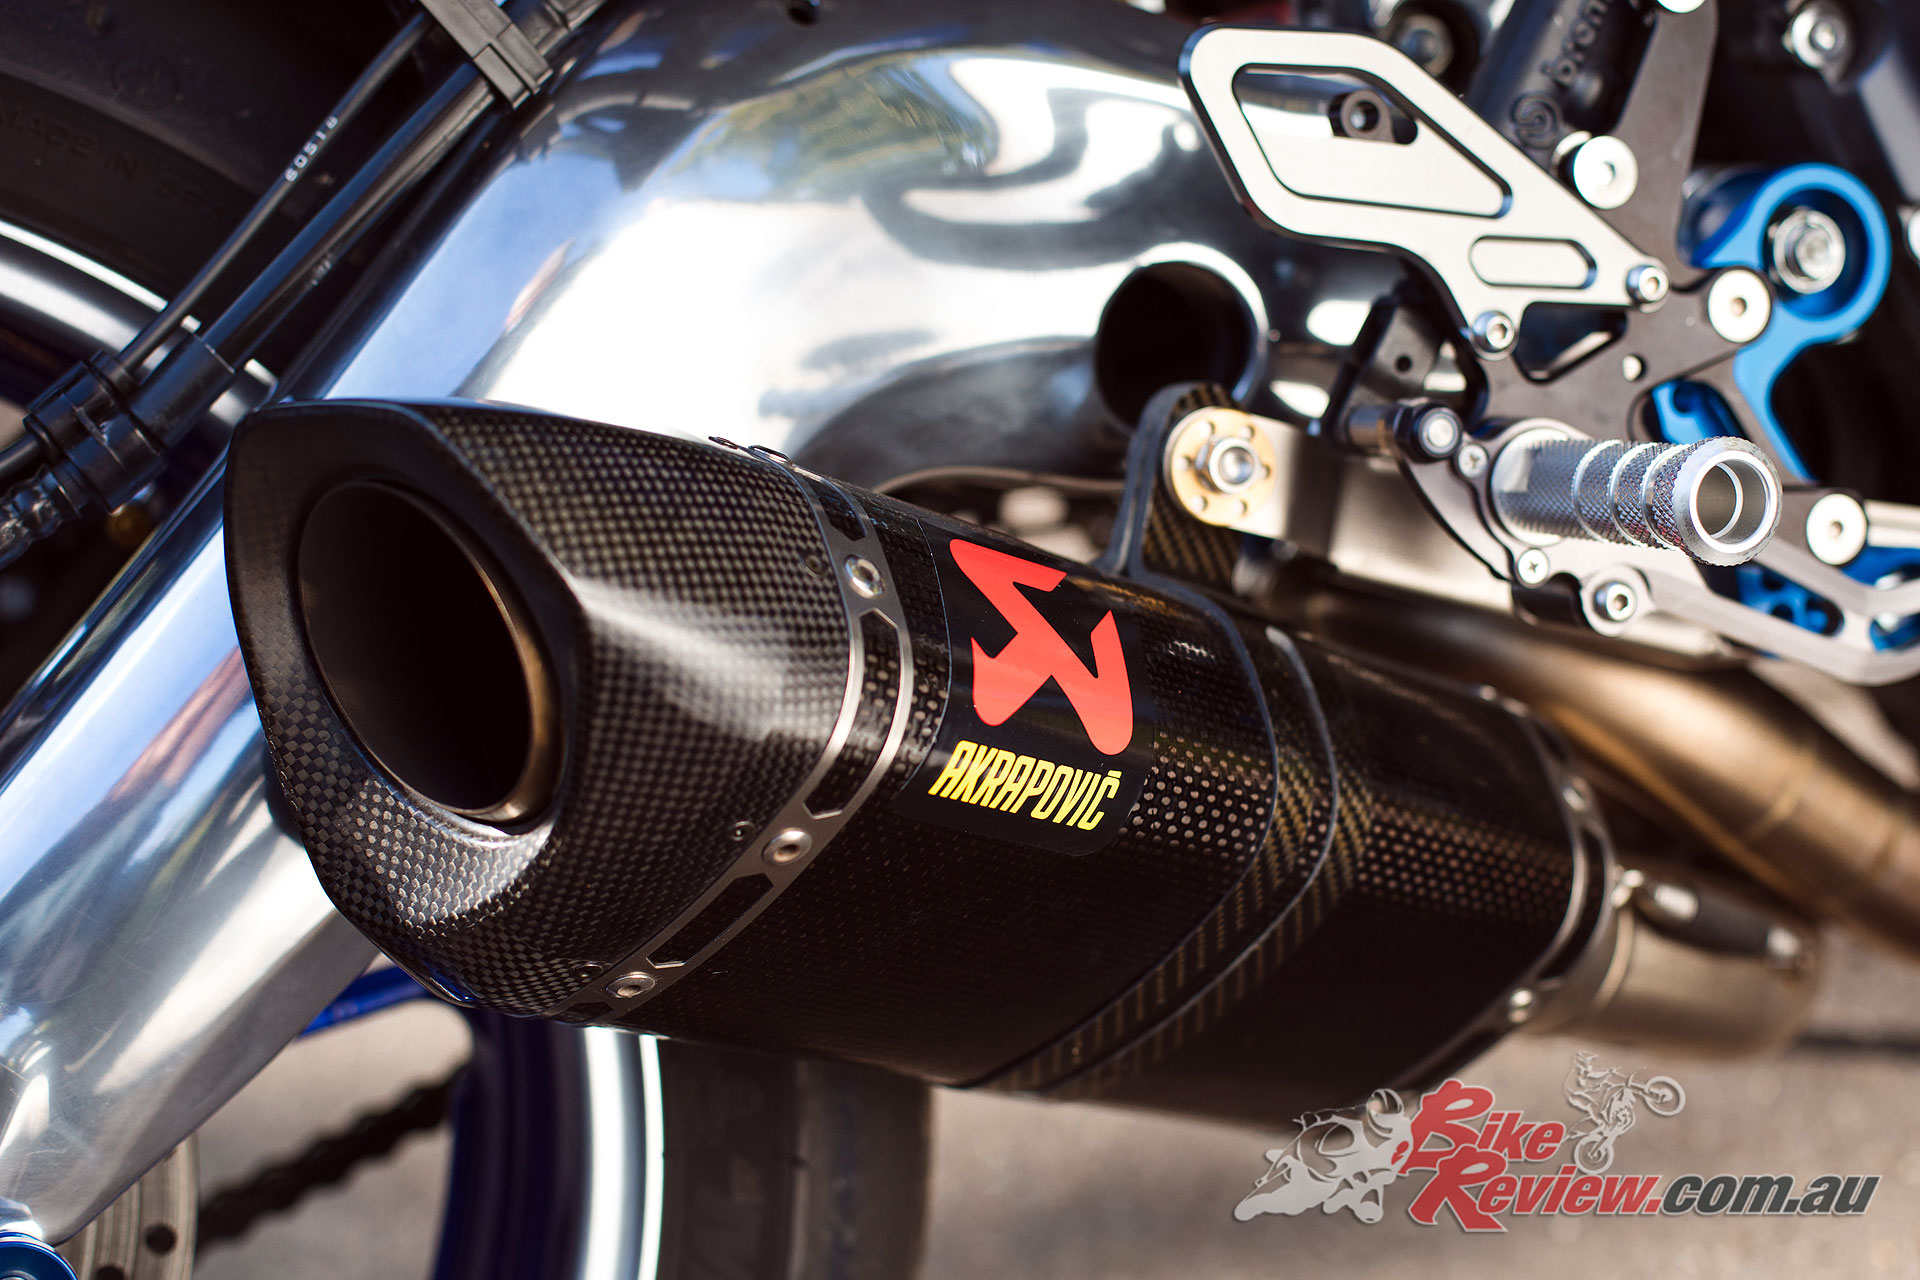 A number of performance options are also available such as the Akro three-into-one exhaust